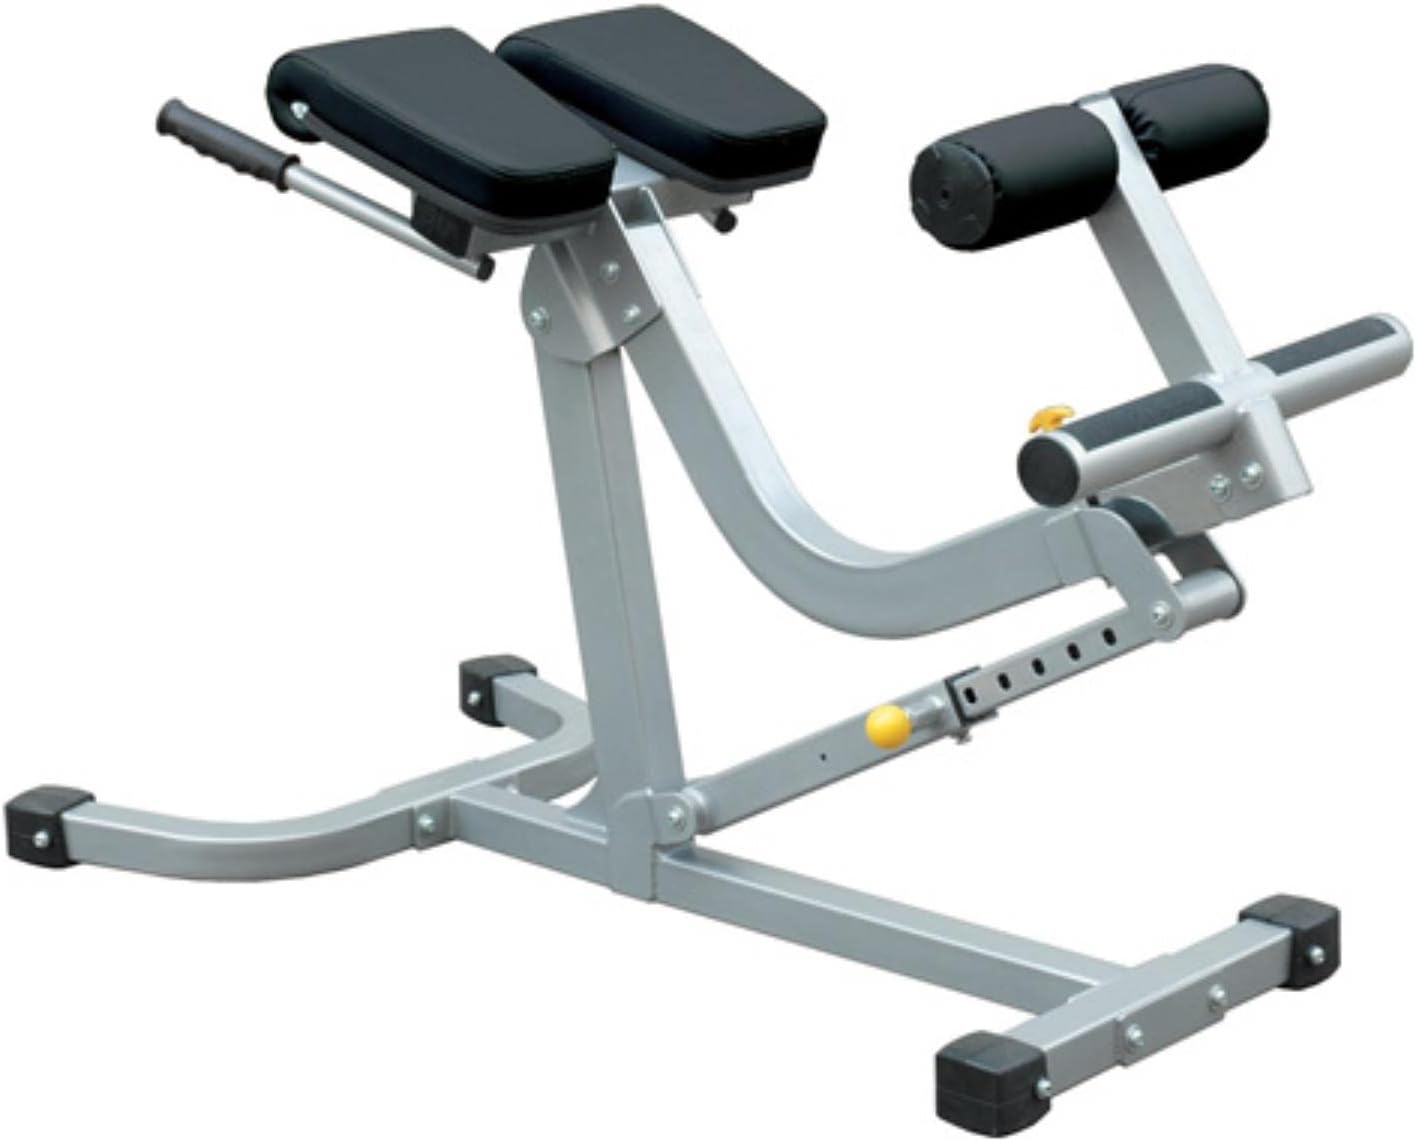 Back/Abdominal Exercise Bench Review